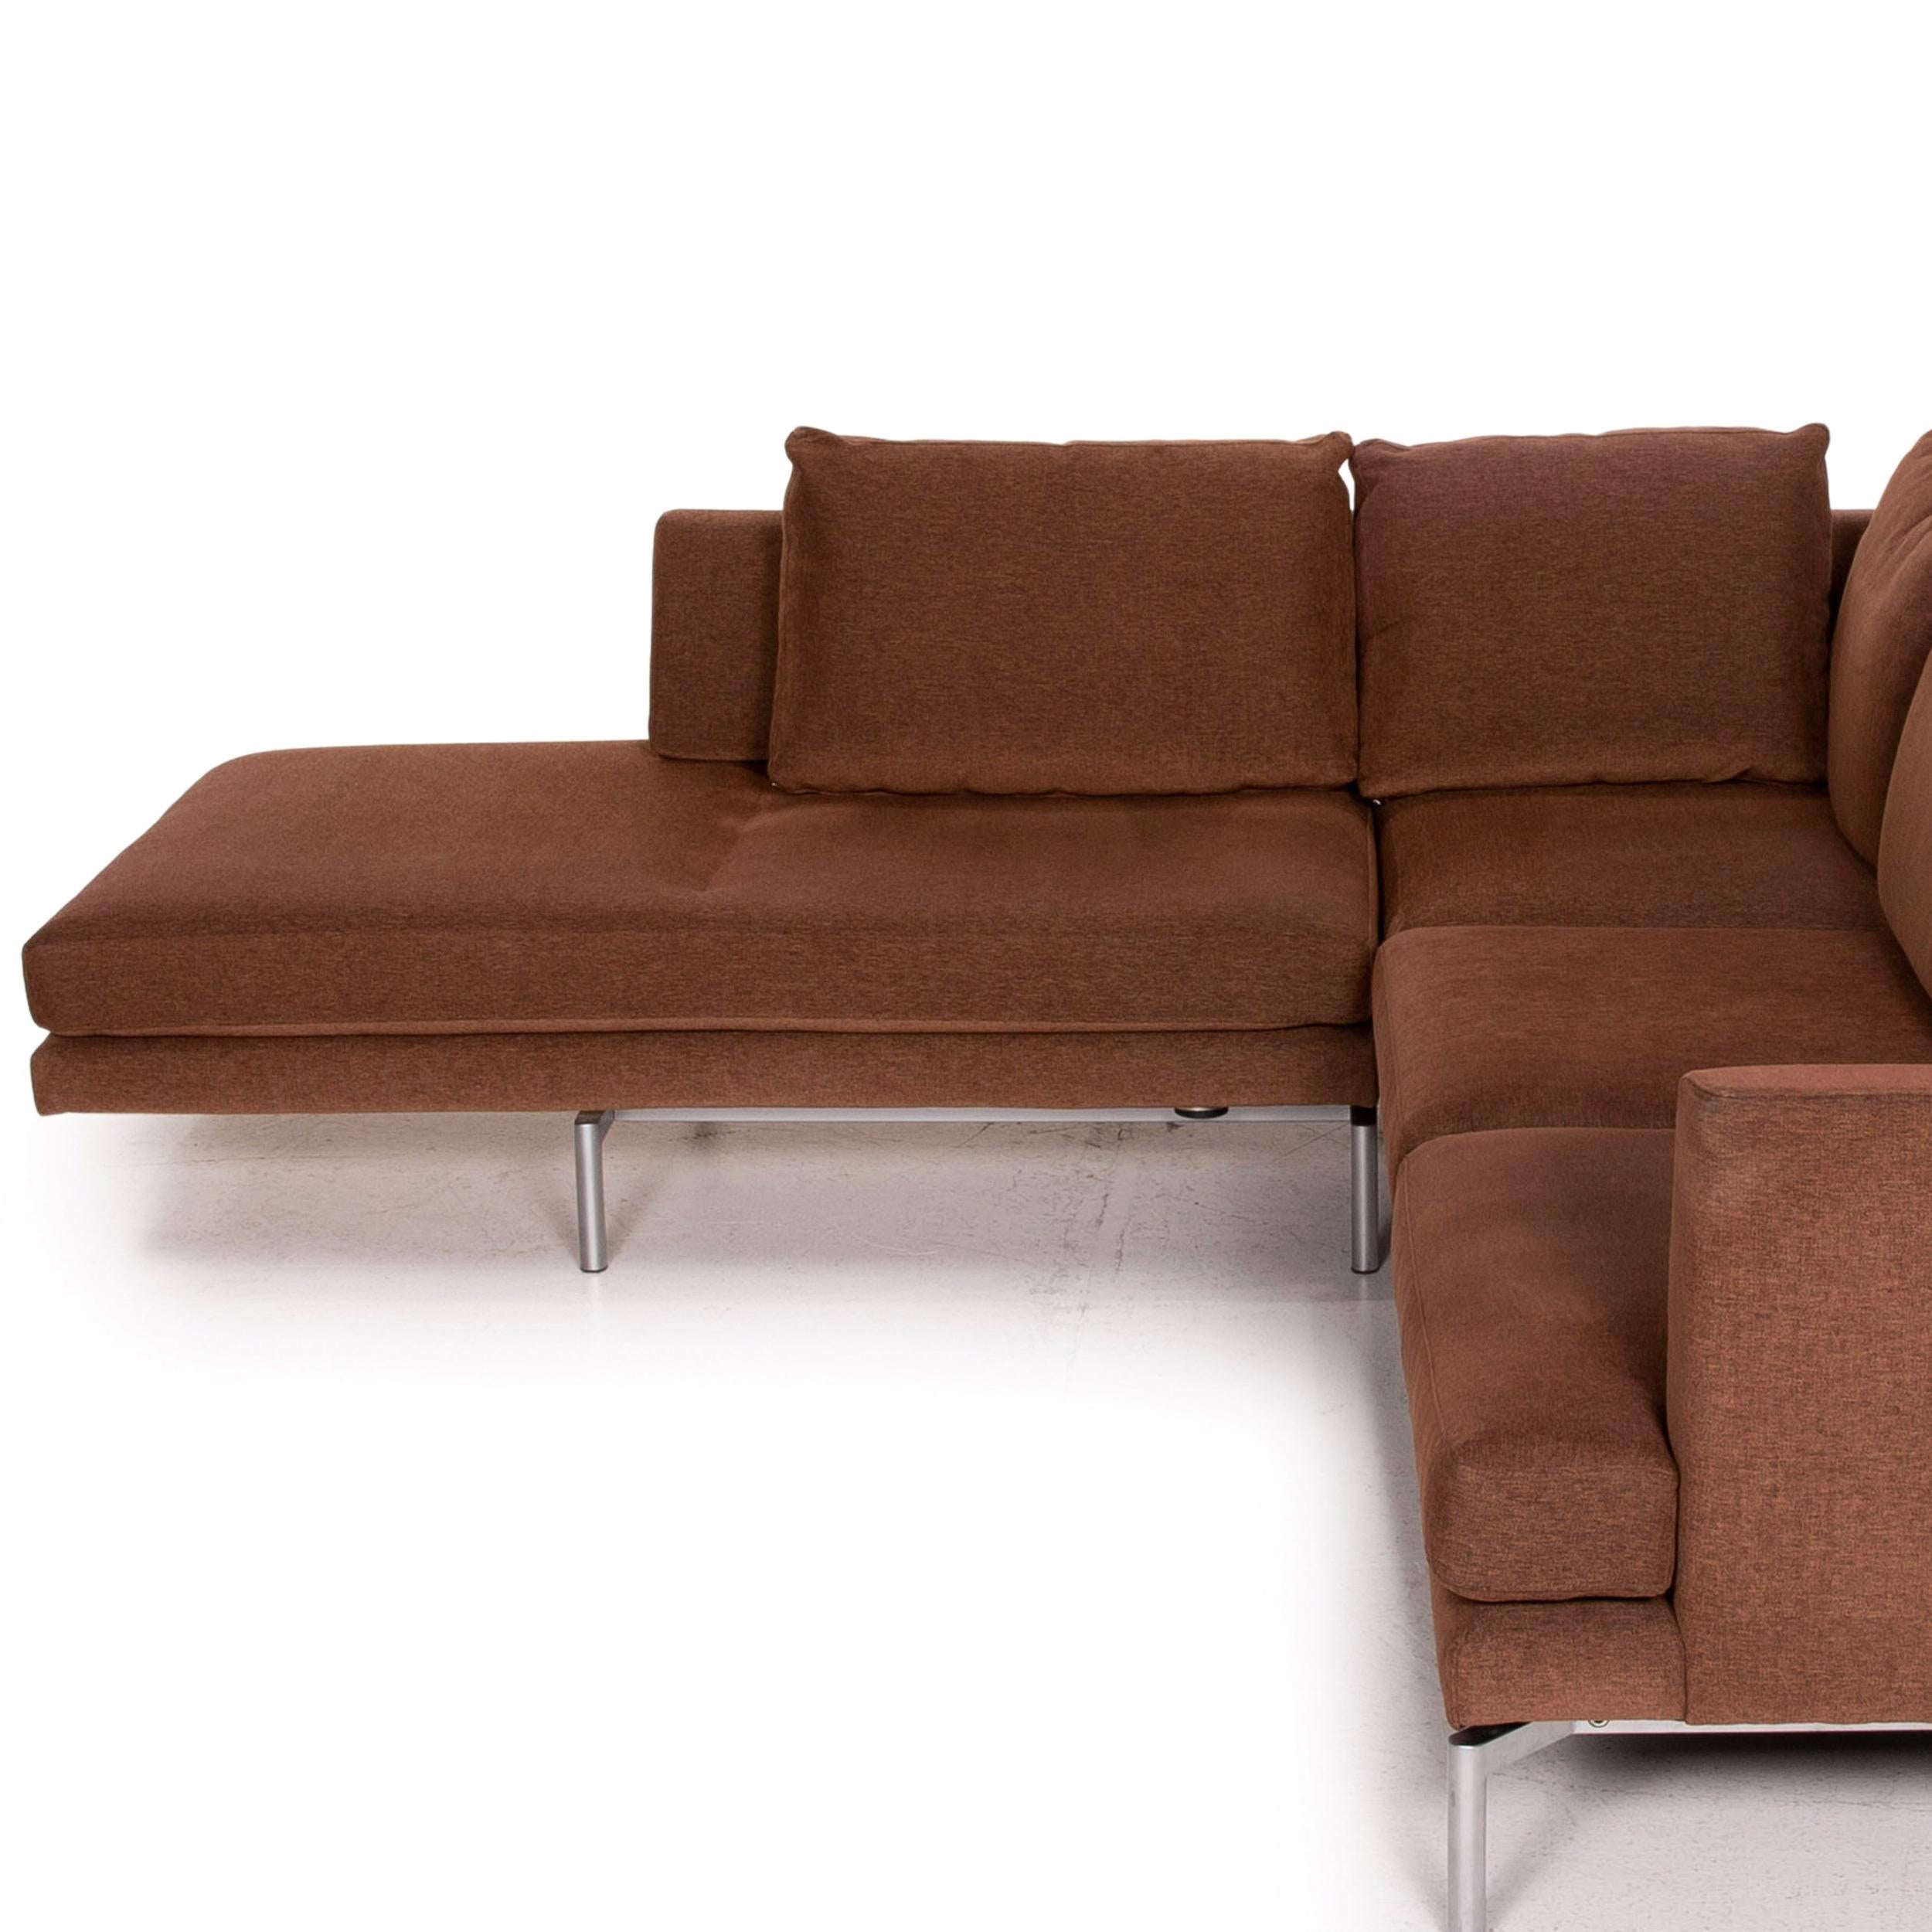 Walter Knoll Good Times Fabric Corner Sofa Brown Function Couch 3